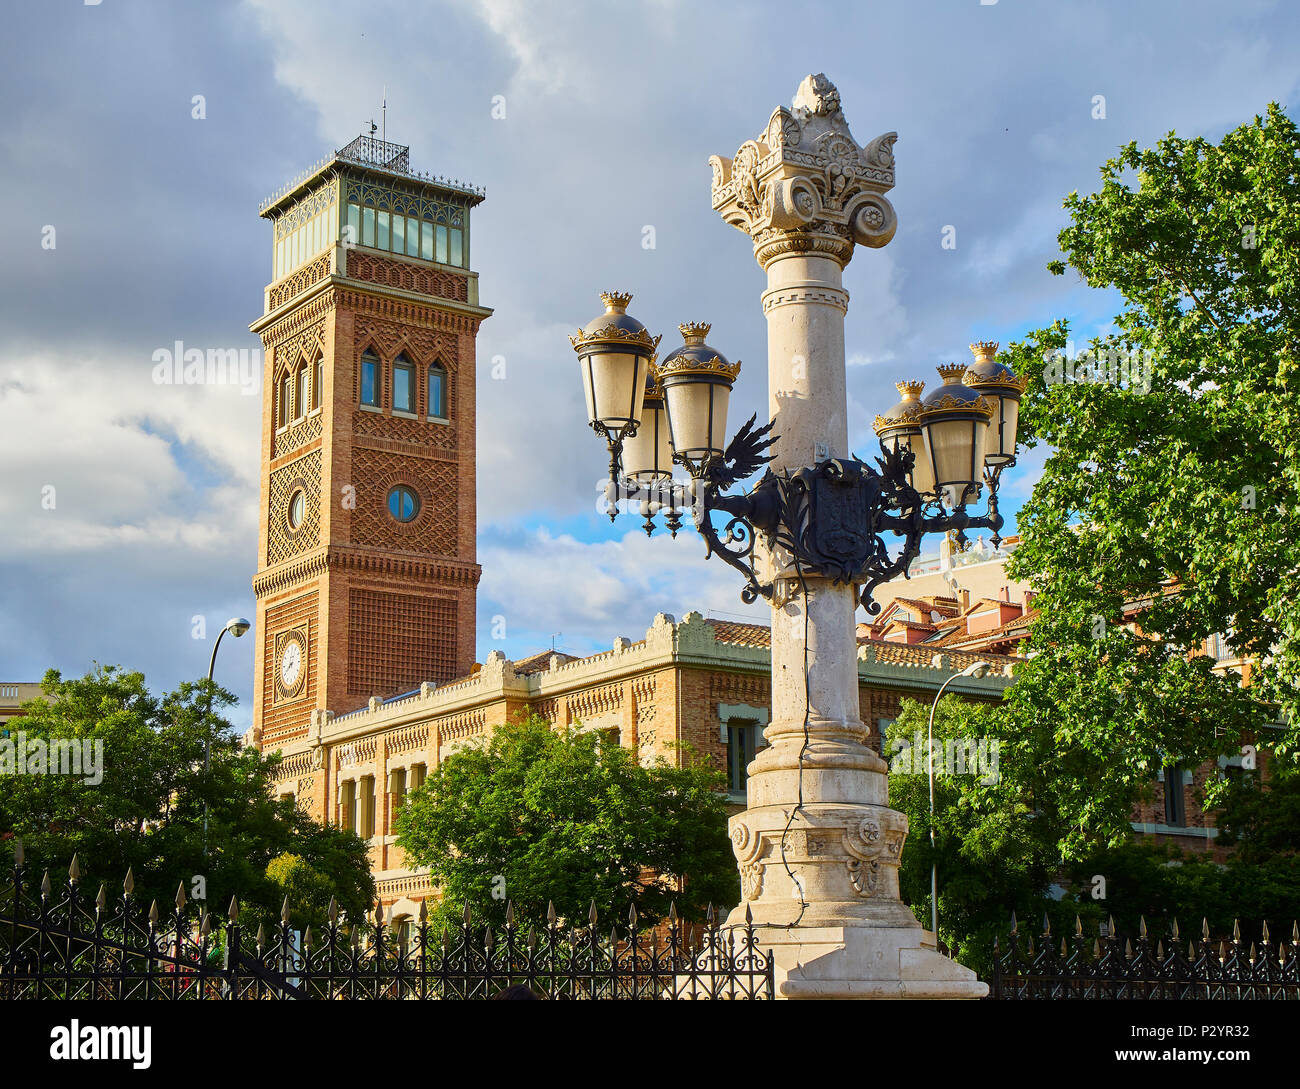 Casa Arabe (Arab House) at sunset. View from The Parque del Buen Retiro Park of Madrid, Spain. Stock Photo